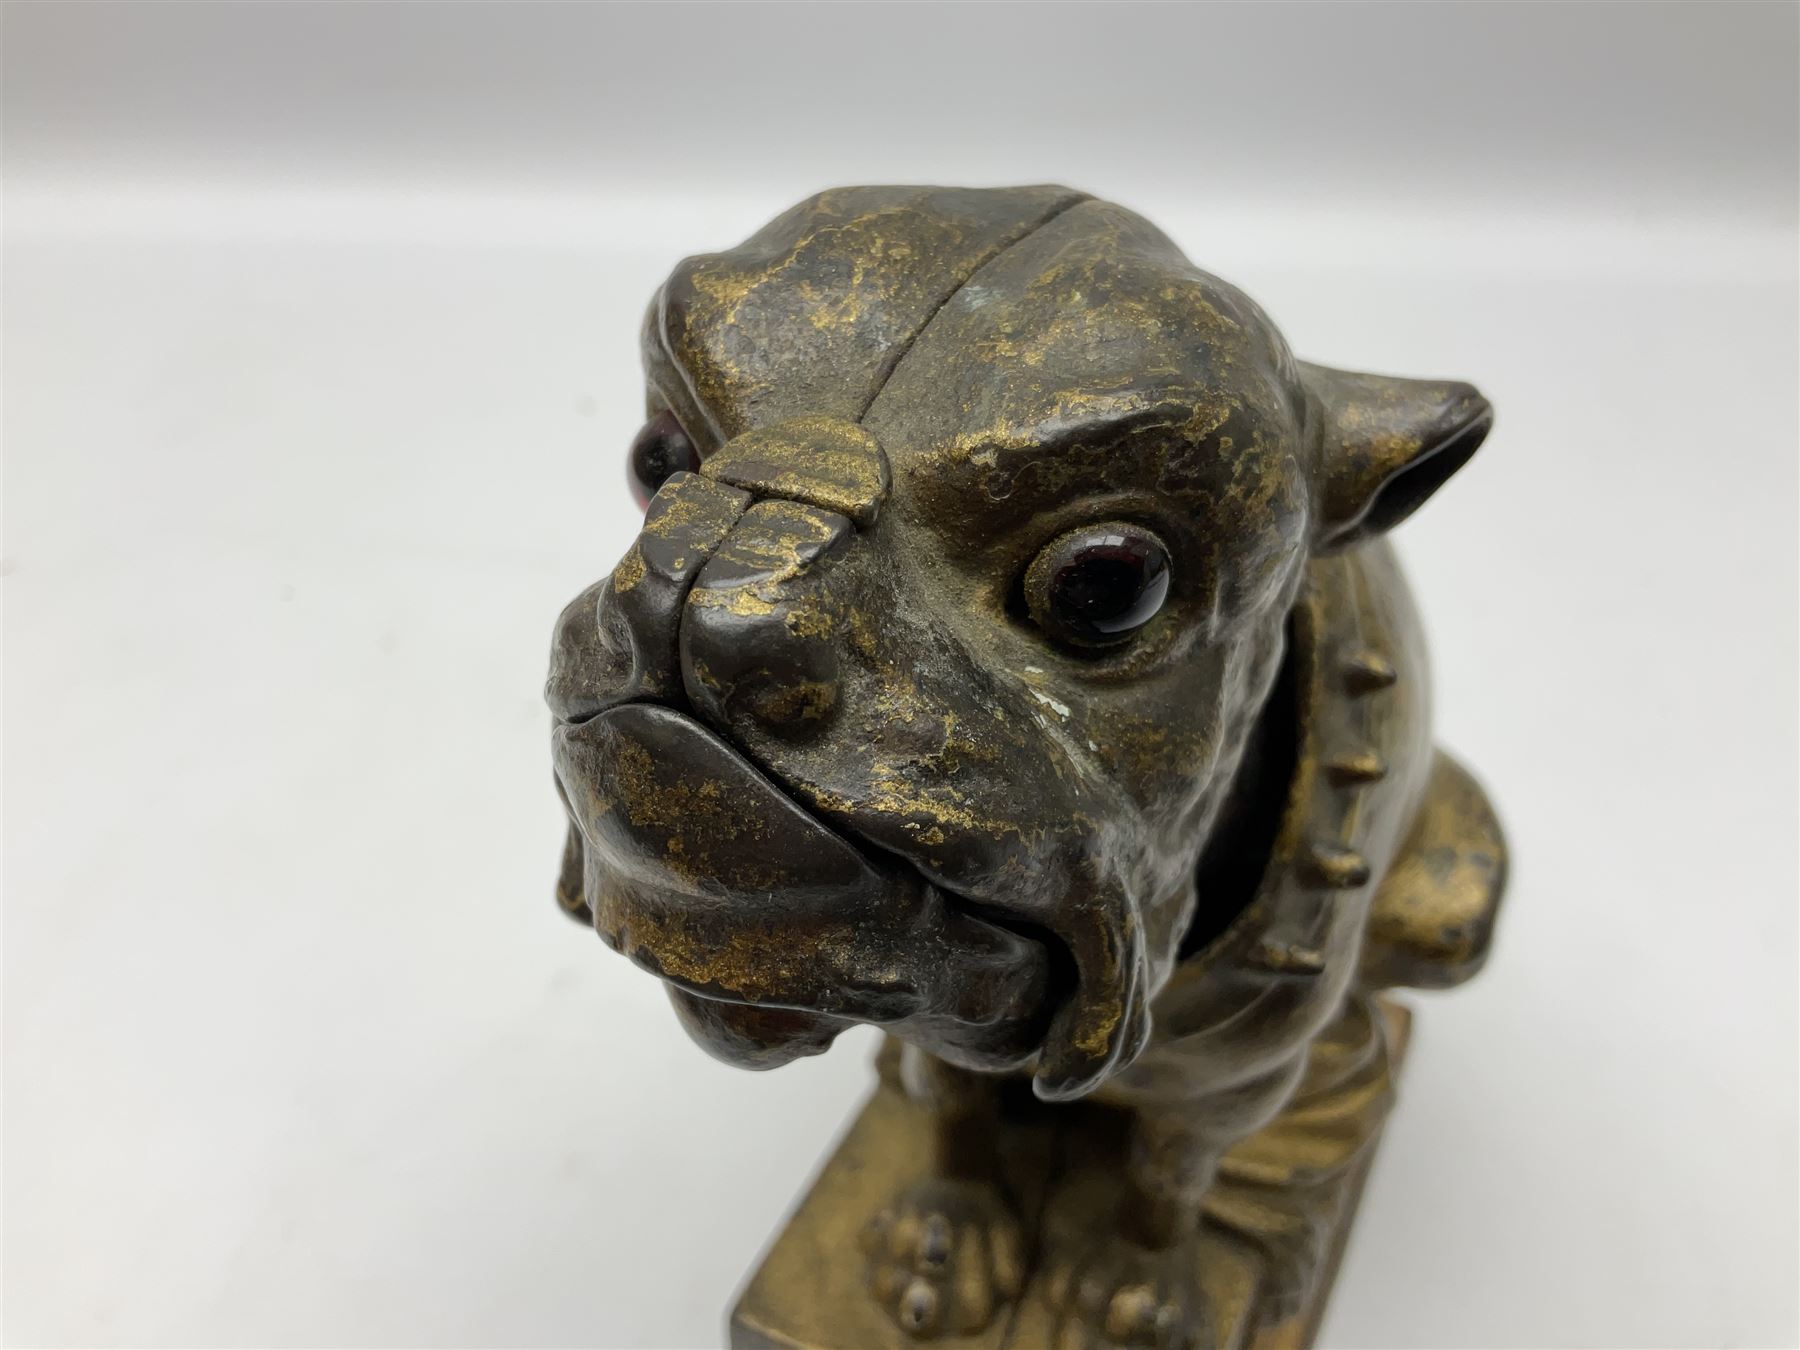 Late 19th century cast-iron mechanical money bank 'Bulldog Bank' by J & E Stevens with coin-on-nose - Image 6 of 8